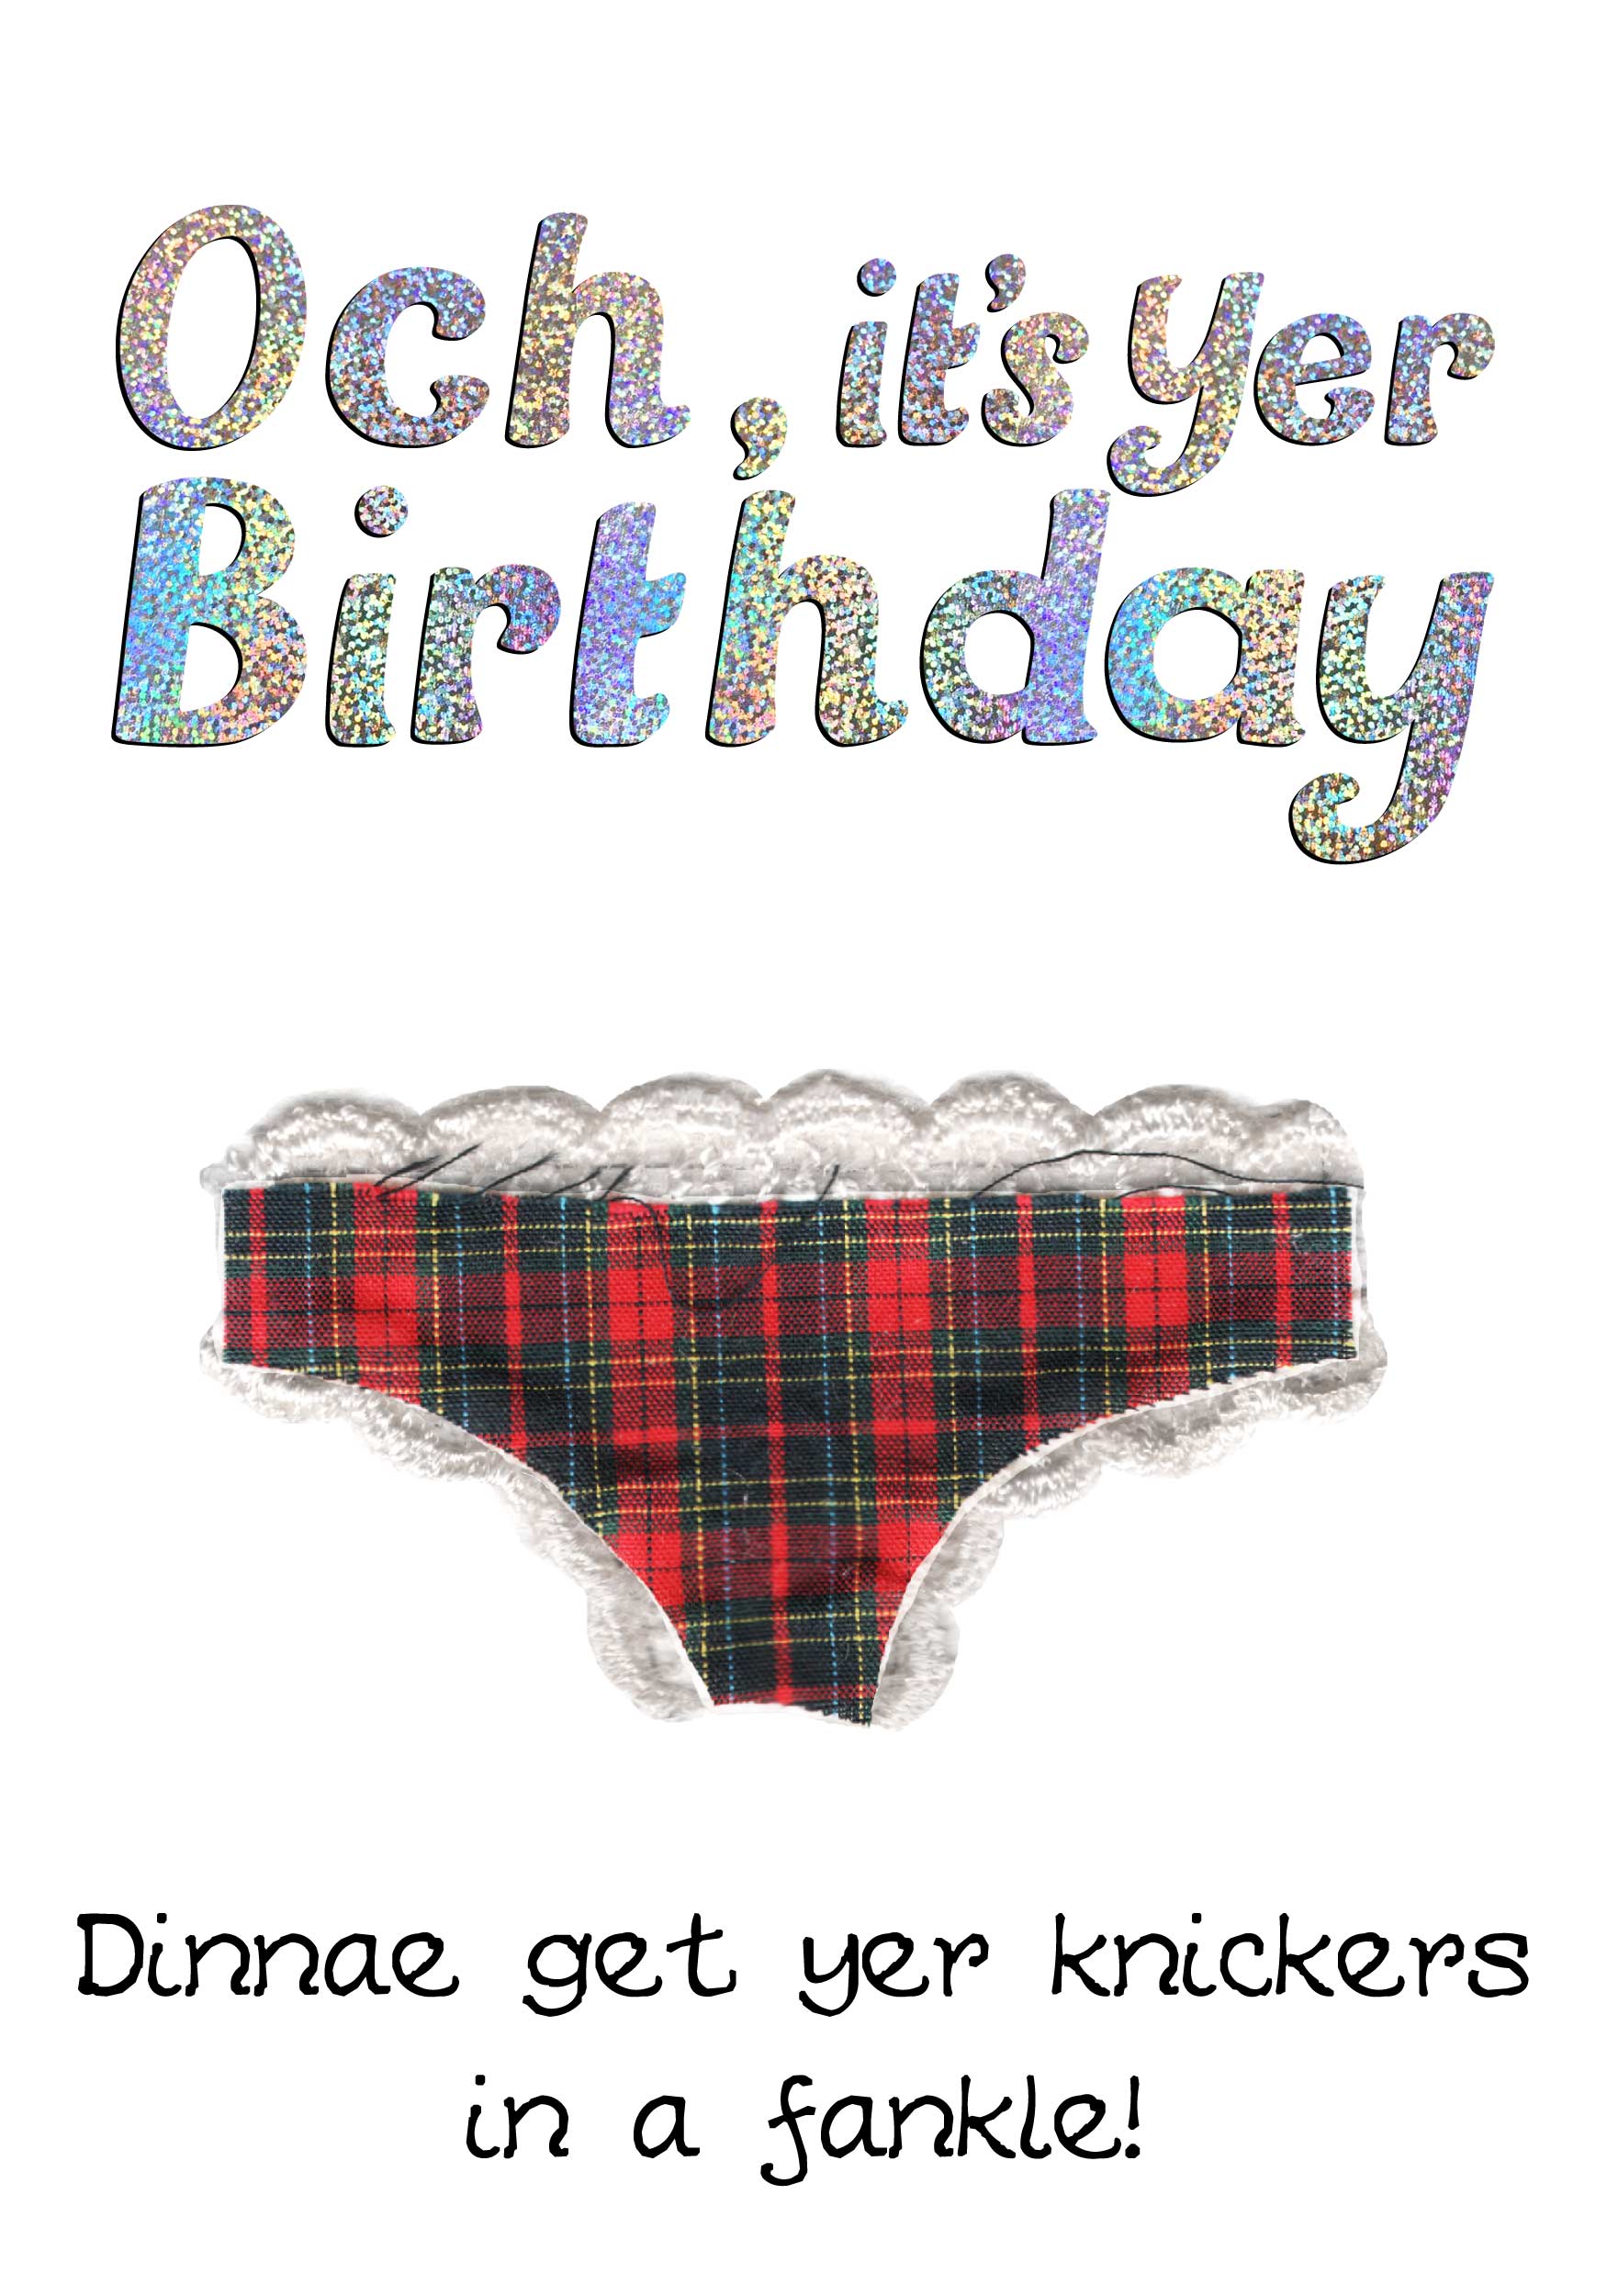 Birthday Knickers in a Fankle Card | Wee Wishes